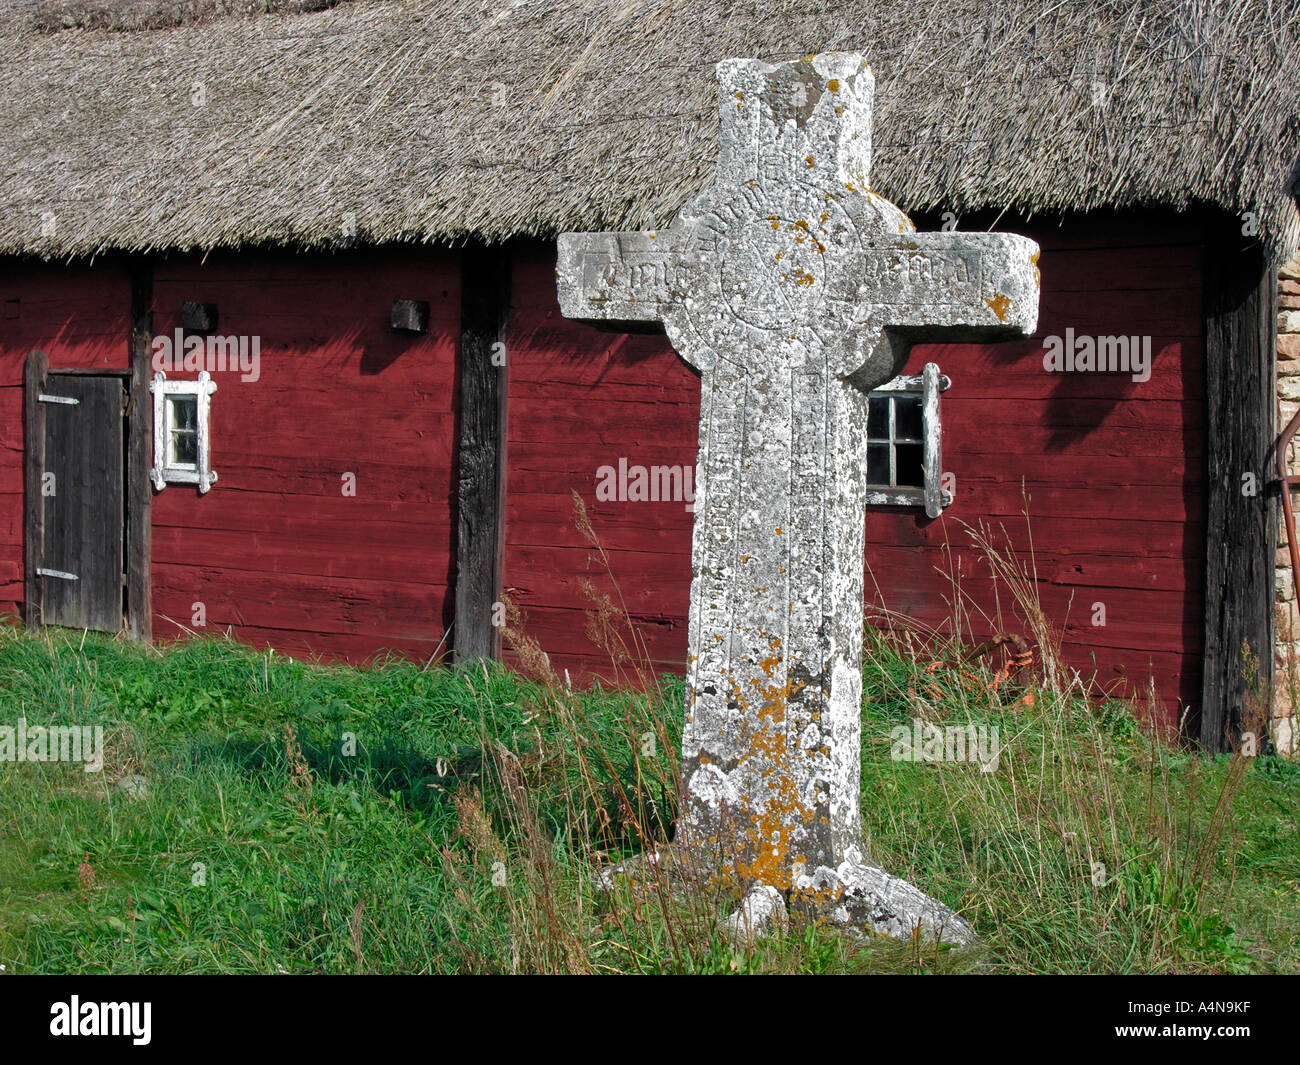 https://c8.alamy.com/comp/A4N9KF/old-granit-stone-cross-in-front-of-a-red-wooden-house-with-thatched-A4N9KF.jpg